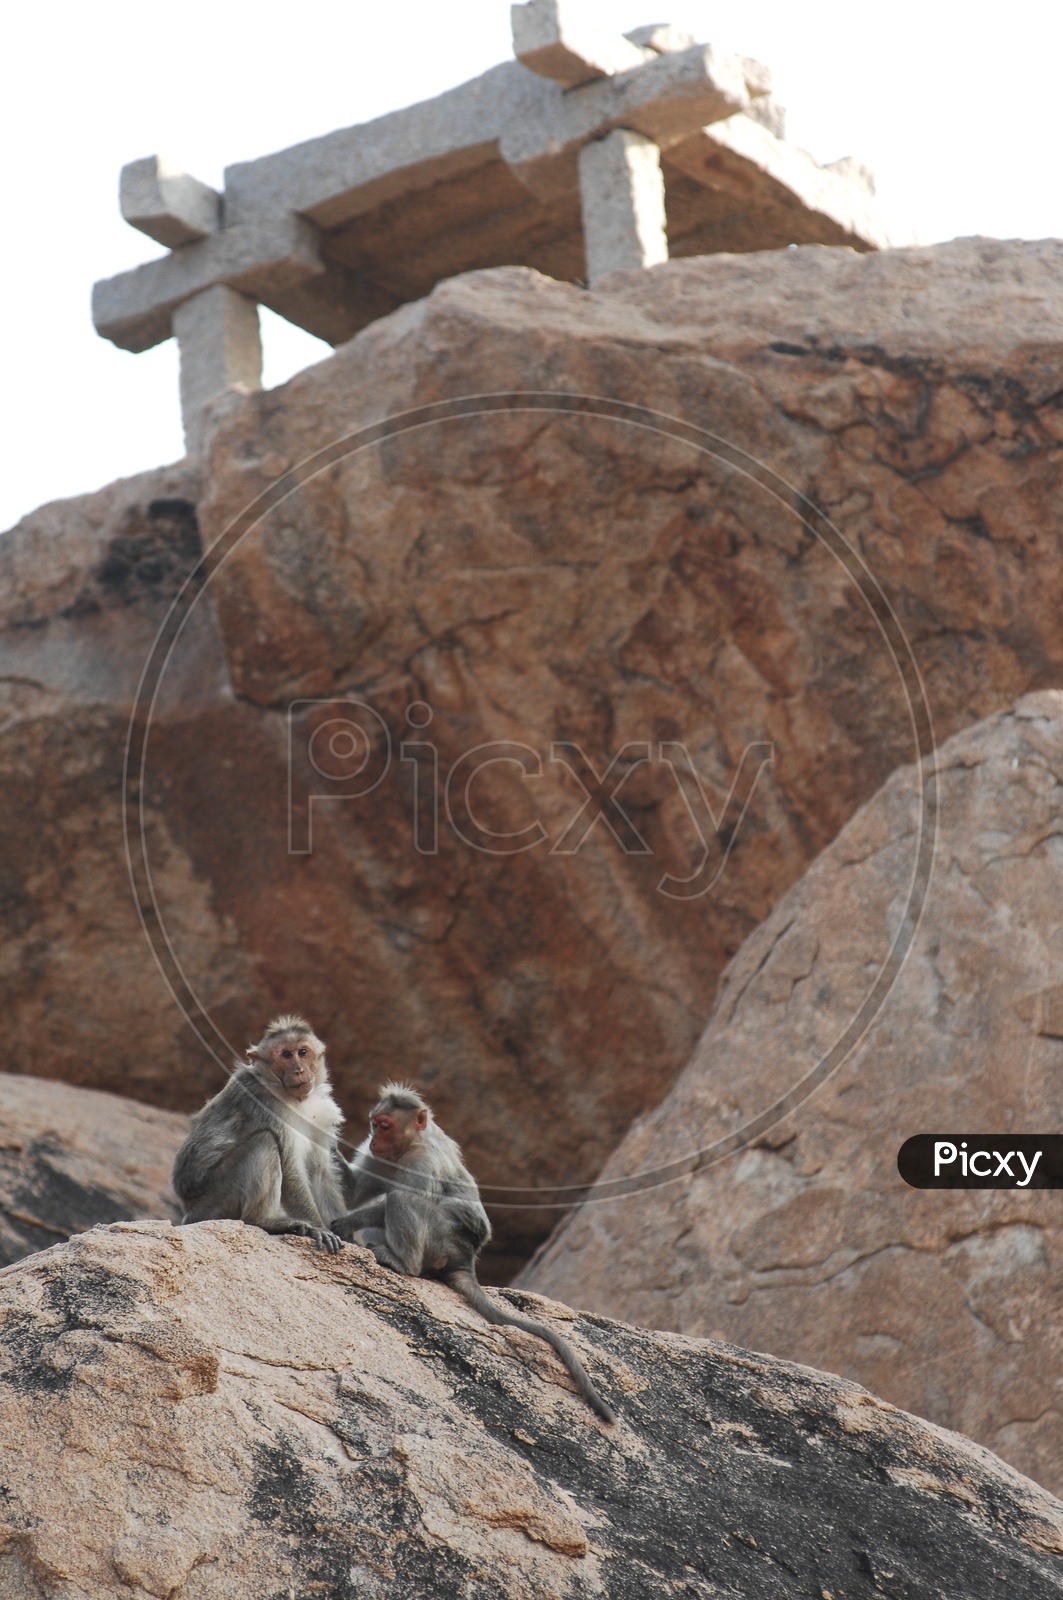 Macaques Or Monkeys Sitting on Rocks